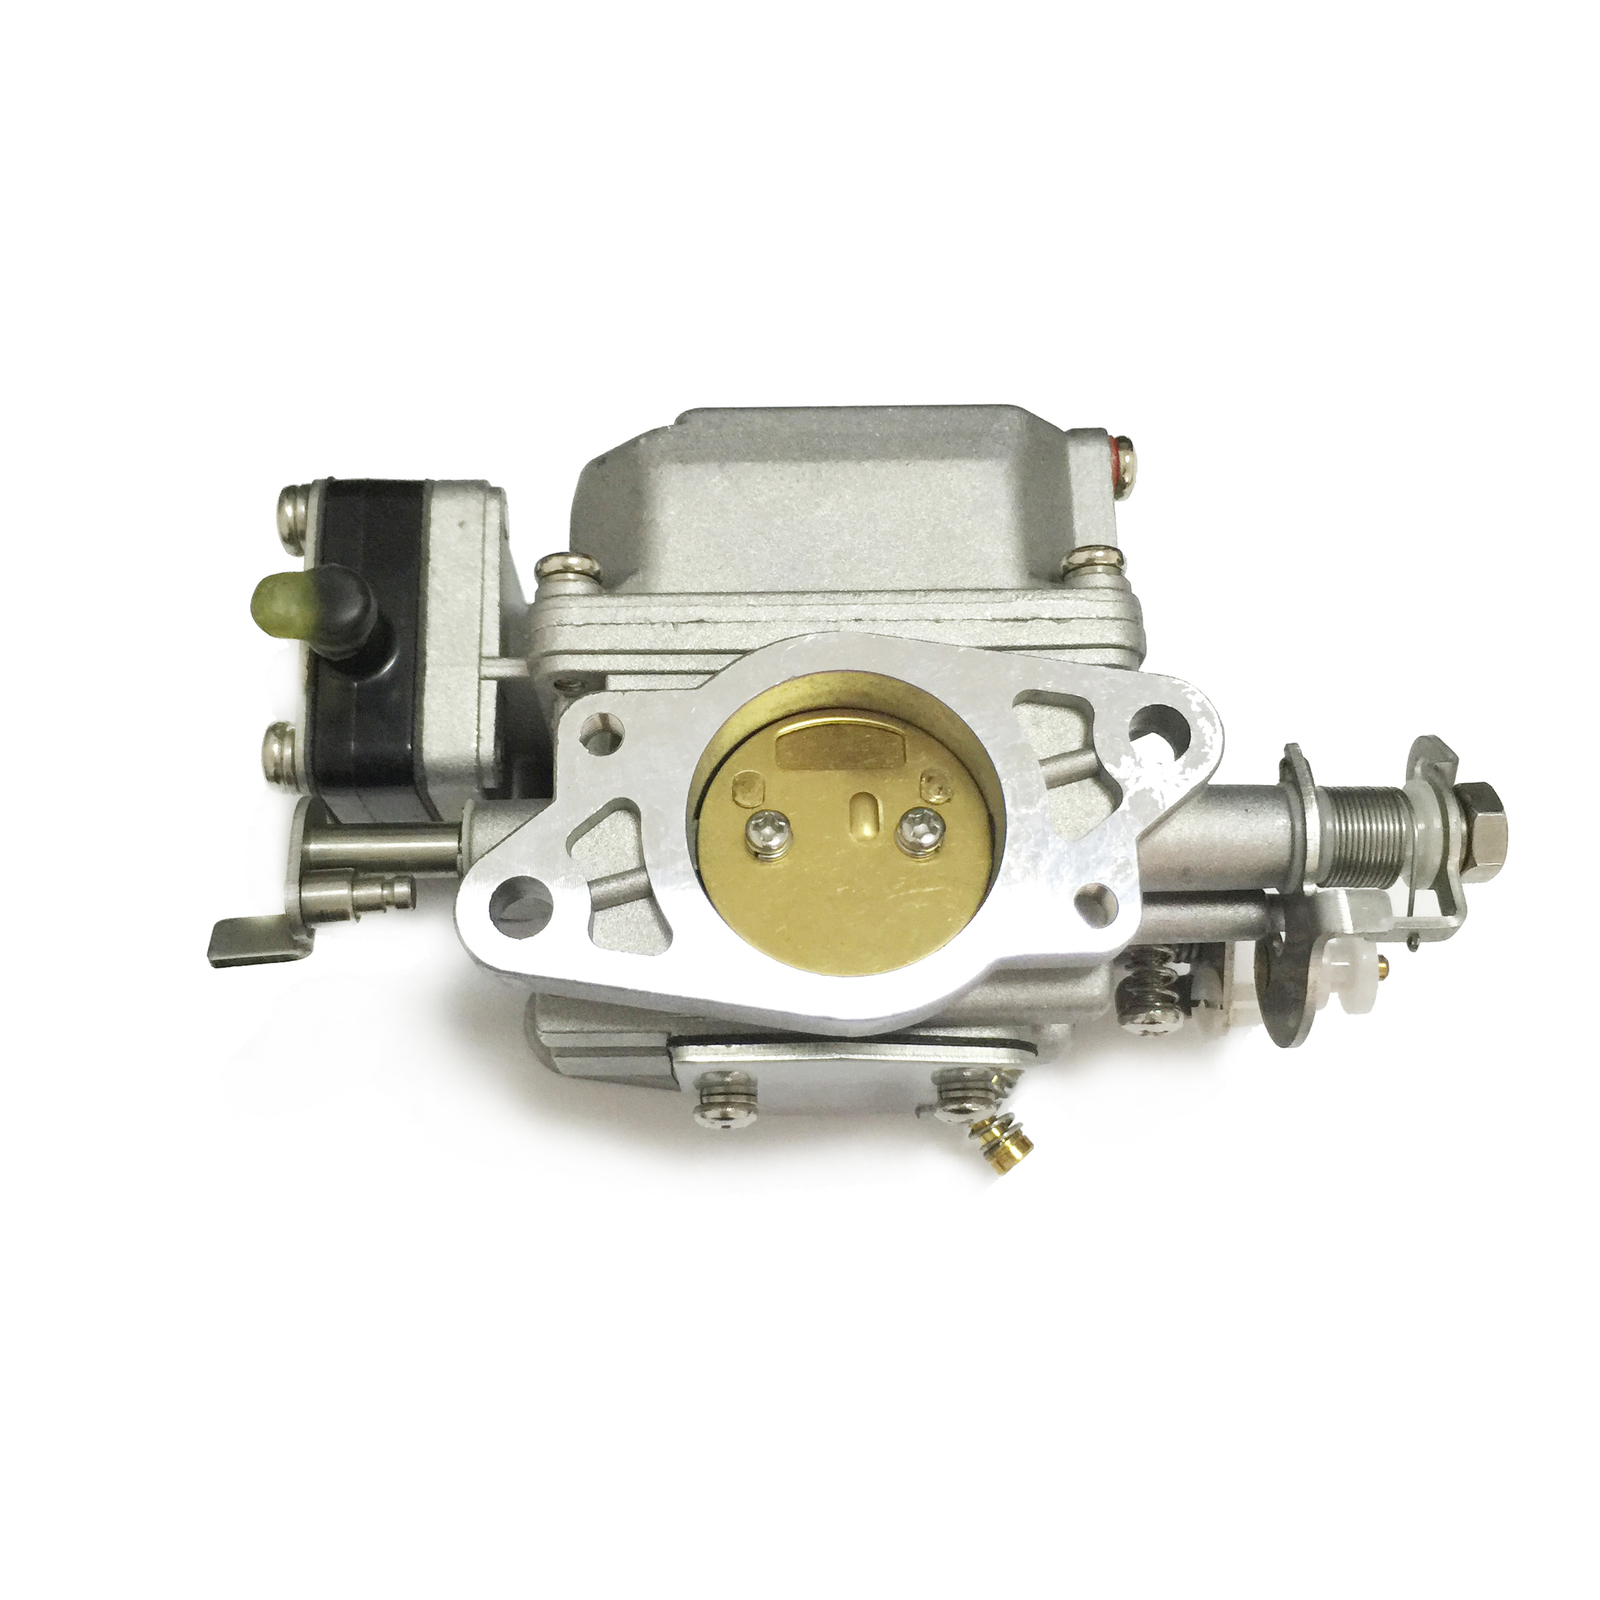 3G2-03100-2 Carburetor For Tohatsu 9.9HP 15HP 18HP M Outboard Engine Boat Motor  - $69.00